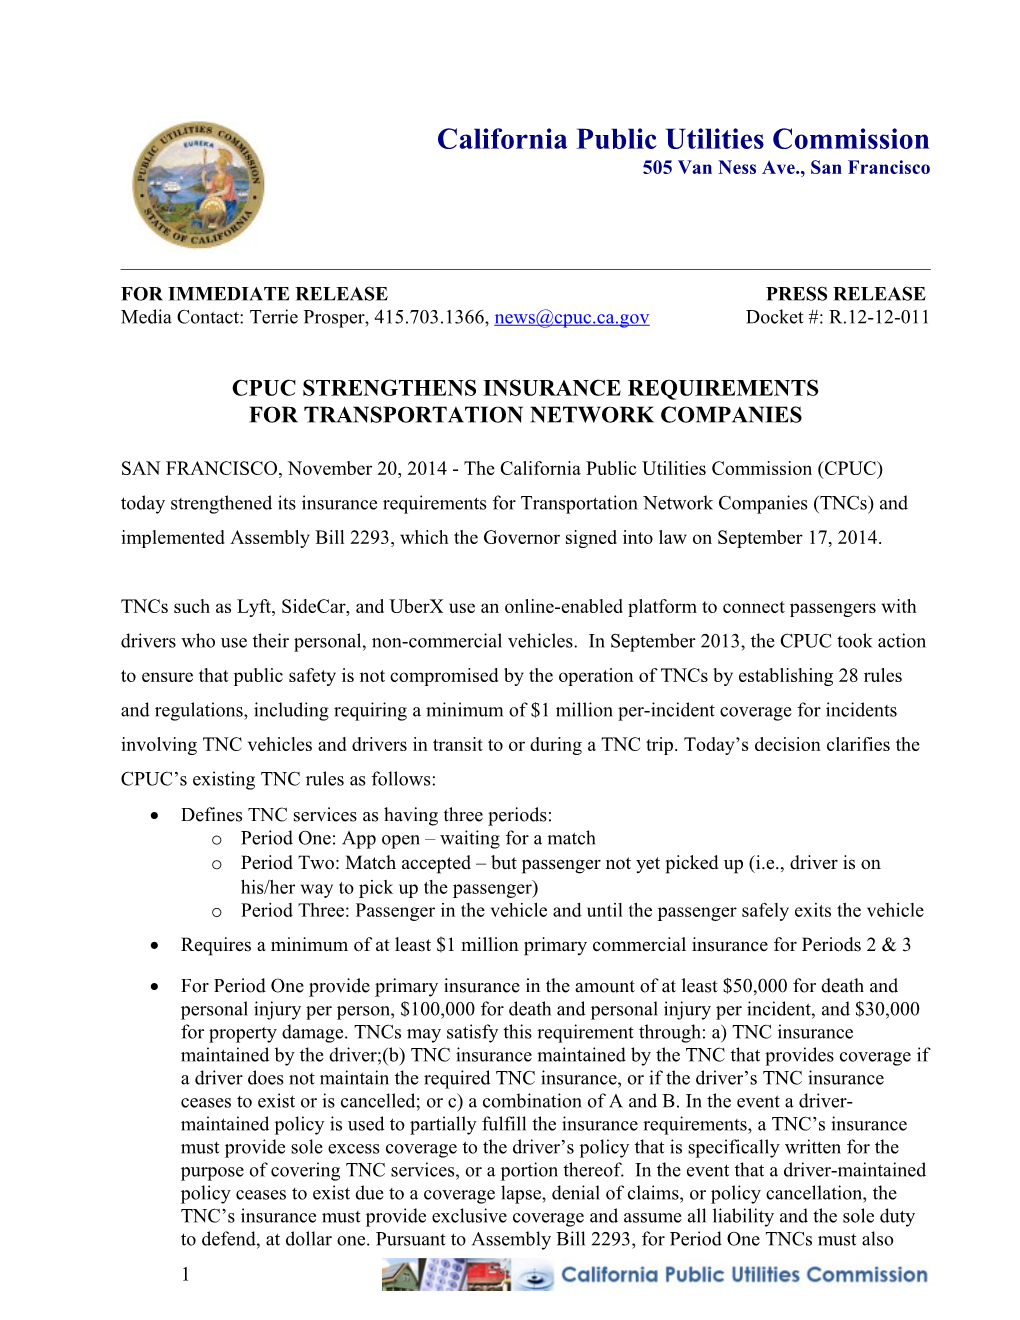 Cpuc Strengthens Insurance Requirements for Transportation Network Companies